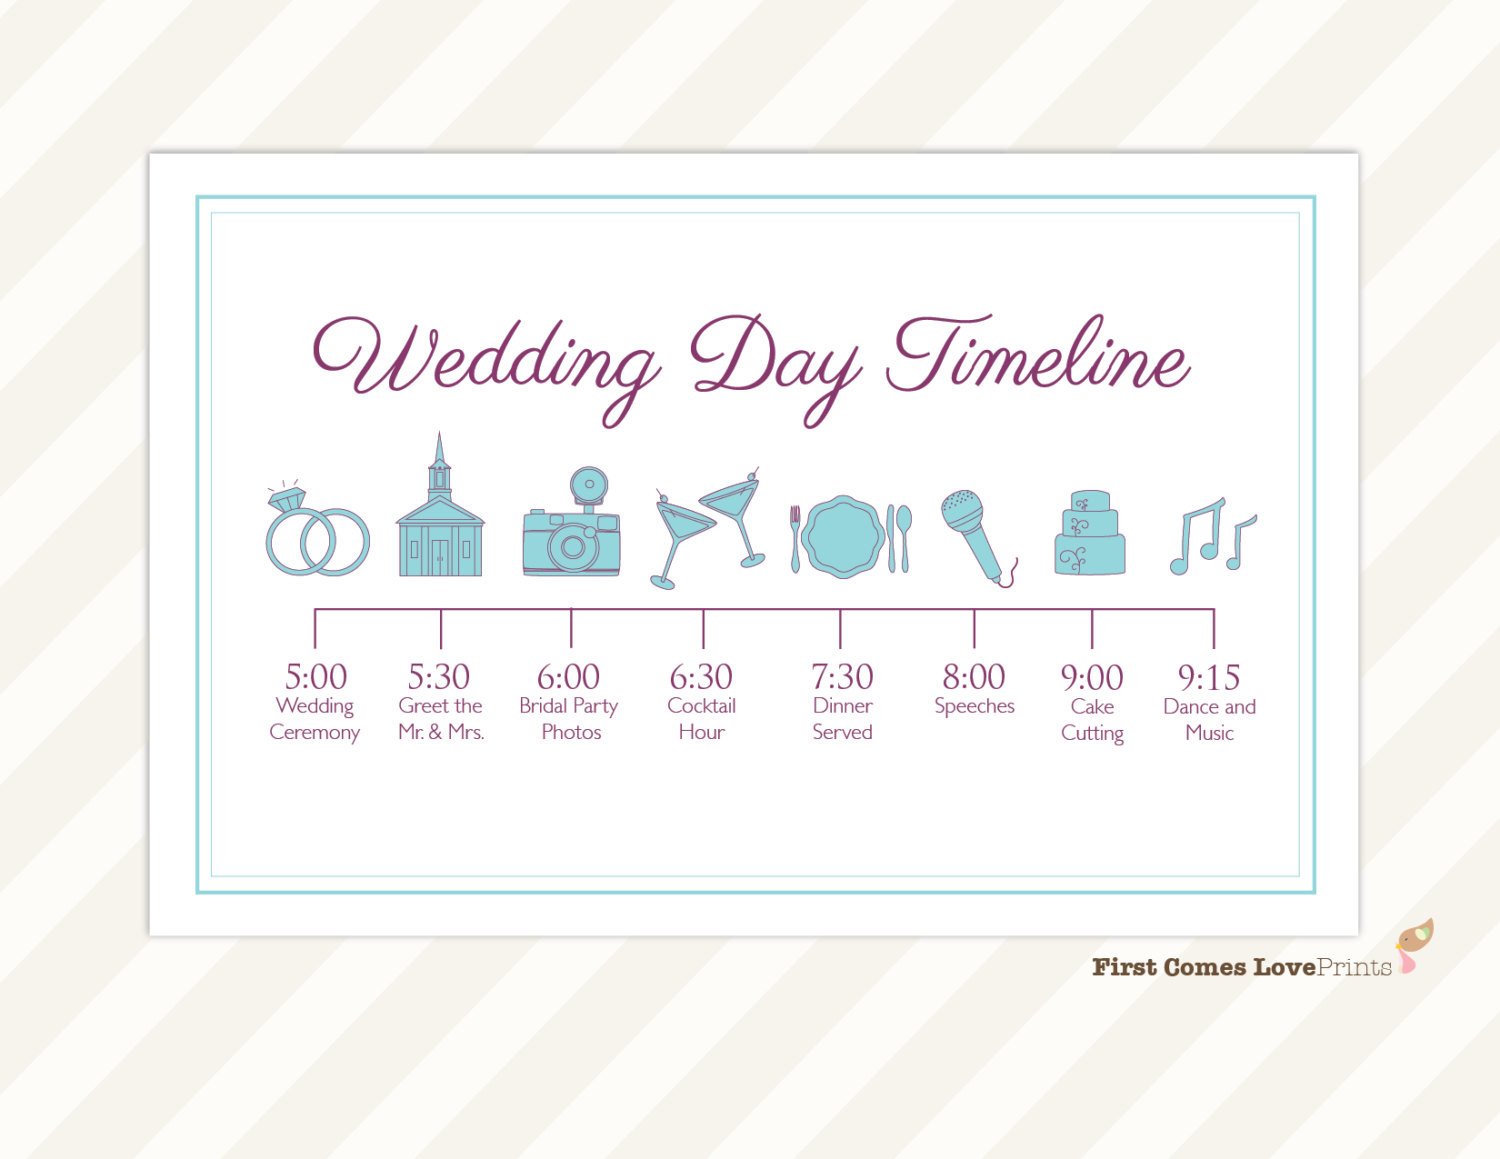 Wedding Day Timeline Card Itinerary for Guests Big Day